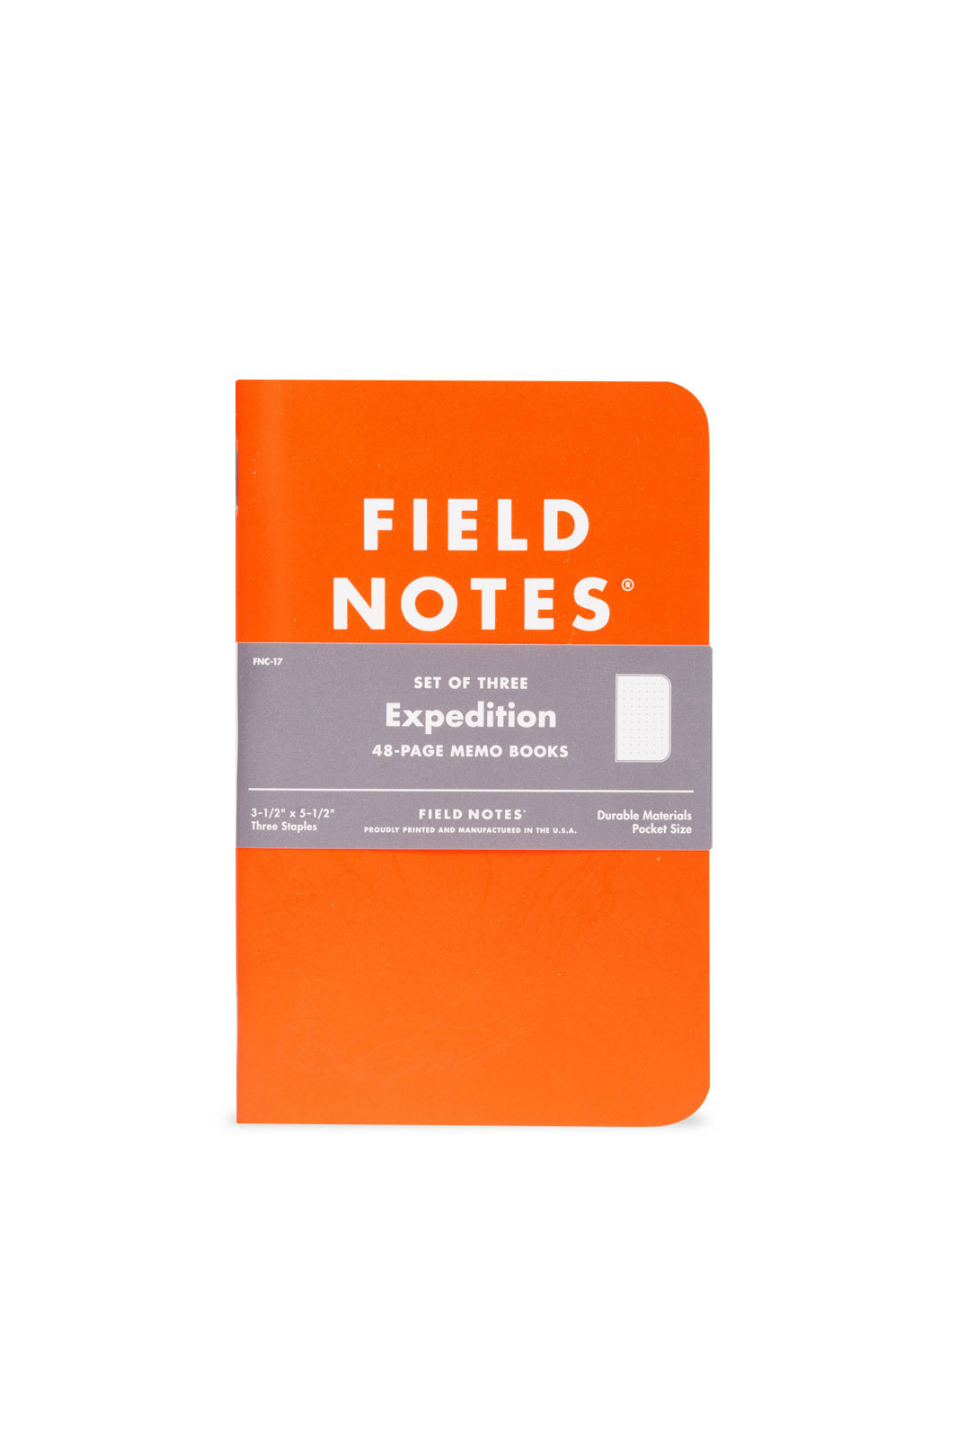 Field Notes - Expedition - Edition